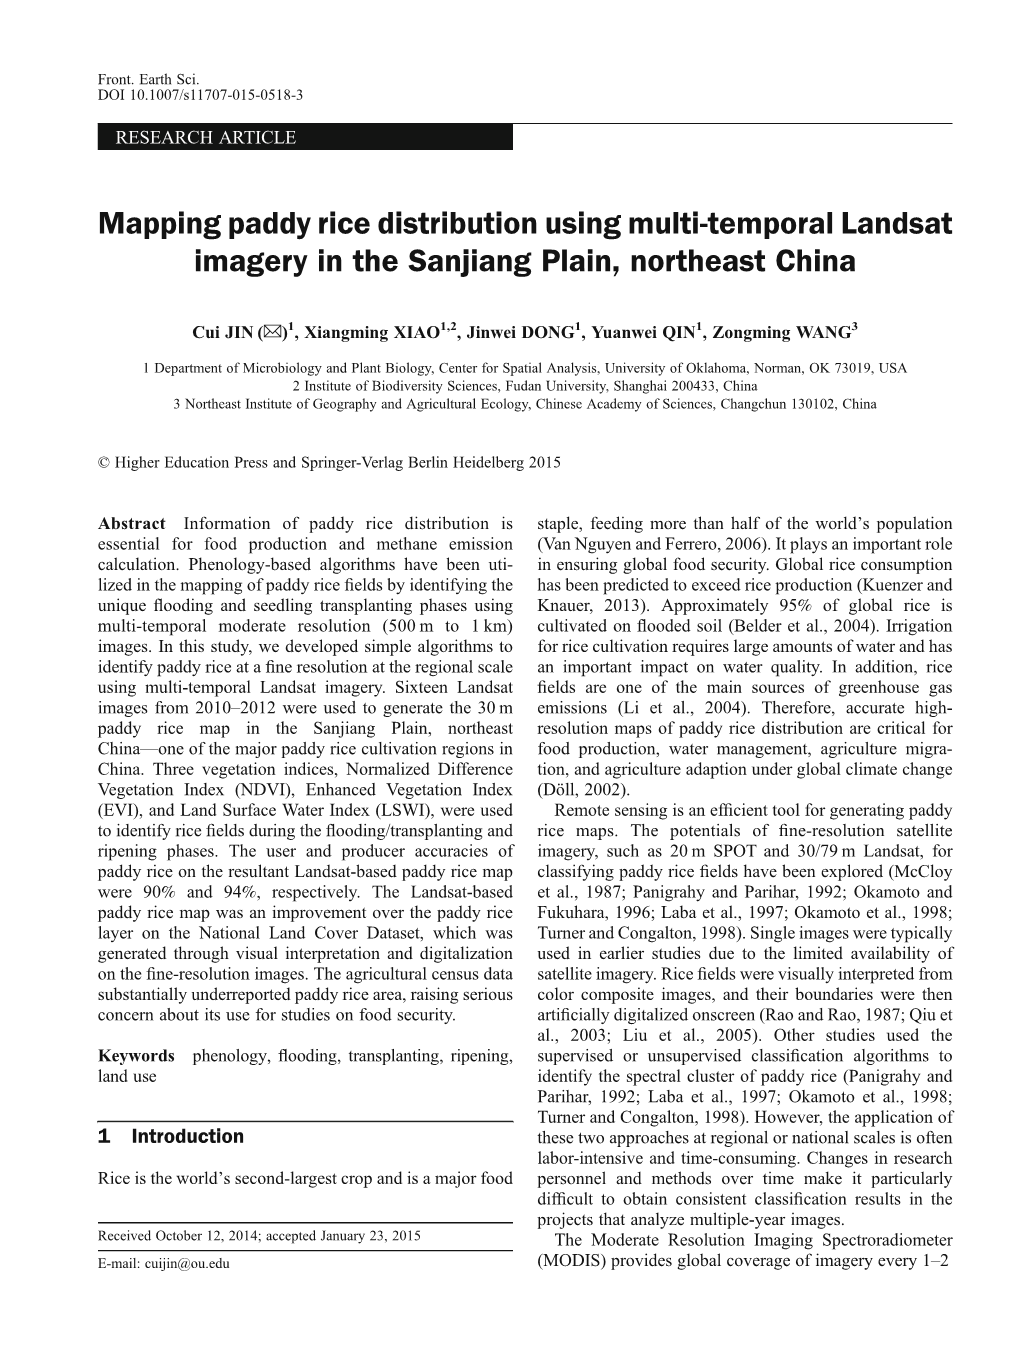 Mapping Paddy Rice Distribution Using Multi-Temporal Landsat Imagery in the Sanjiang Plain, Northeast China